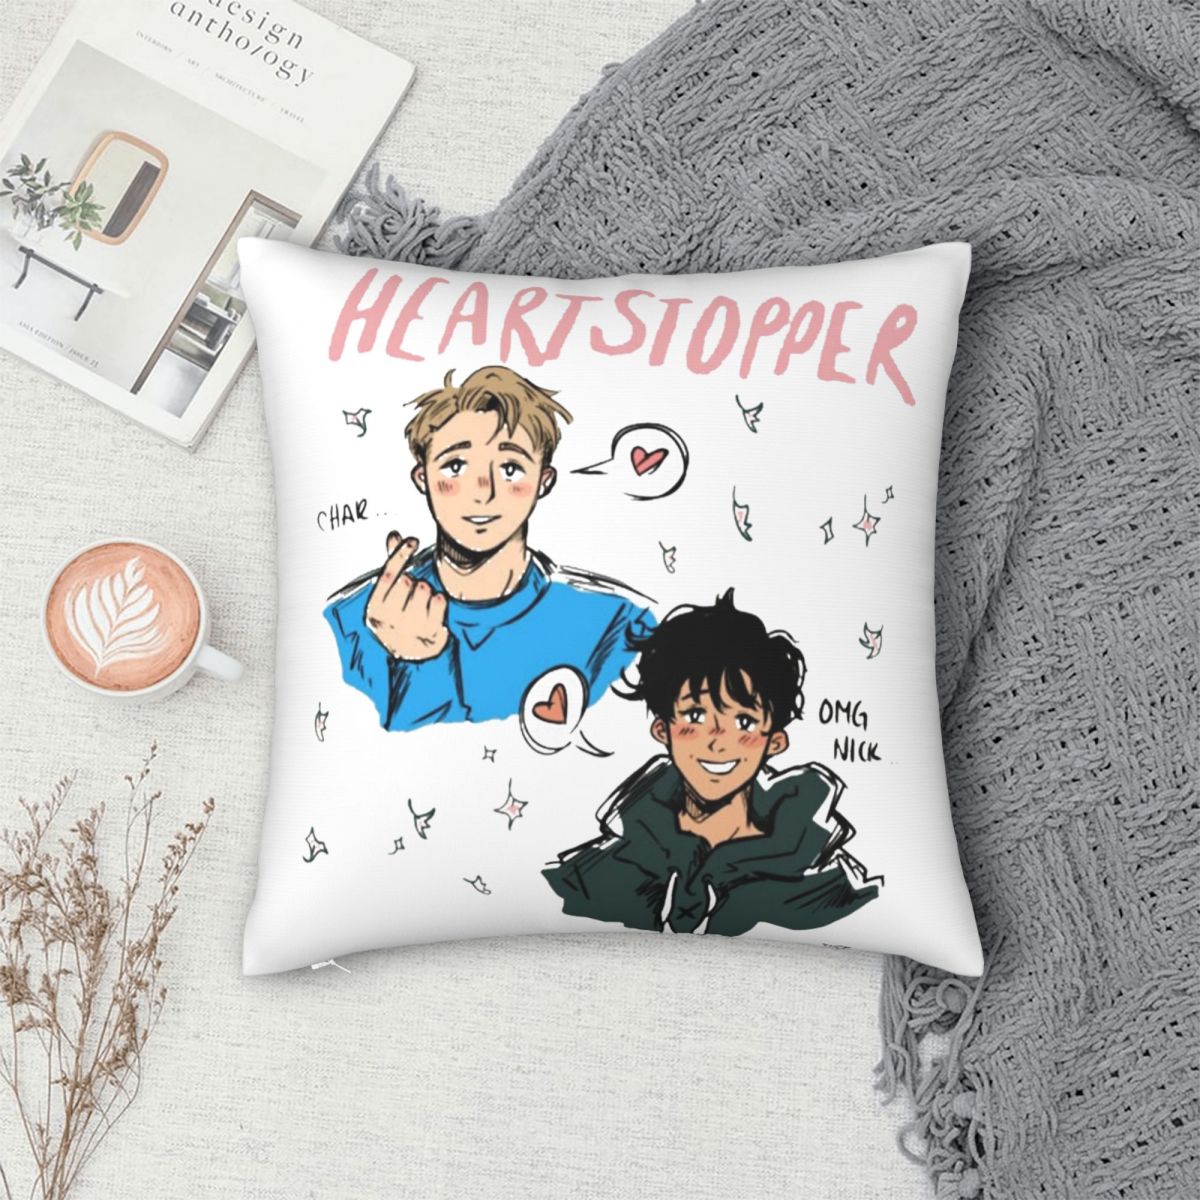 Heartstopper Square Pillow Case Oseman Charlie Nick Boys Love Cushion Cover Zippered Throw Pillow Case Cover for Home 40x40cm